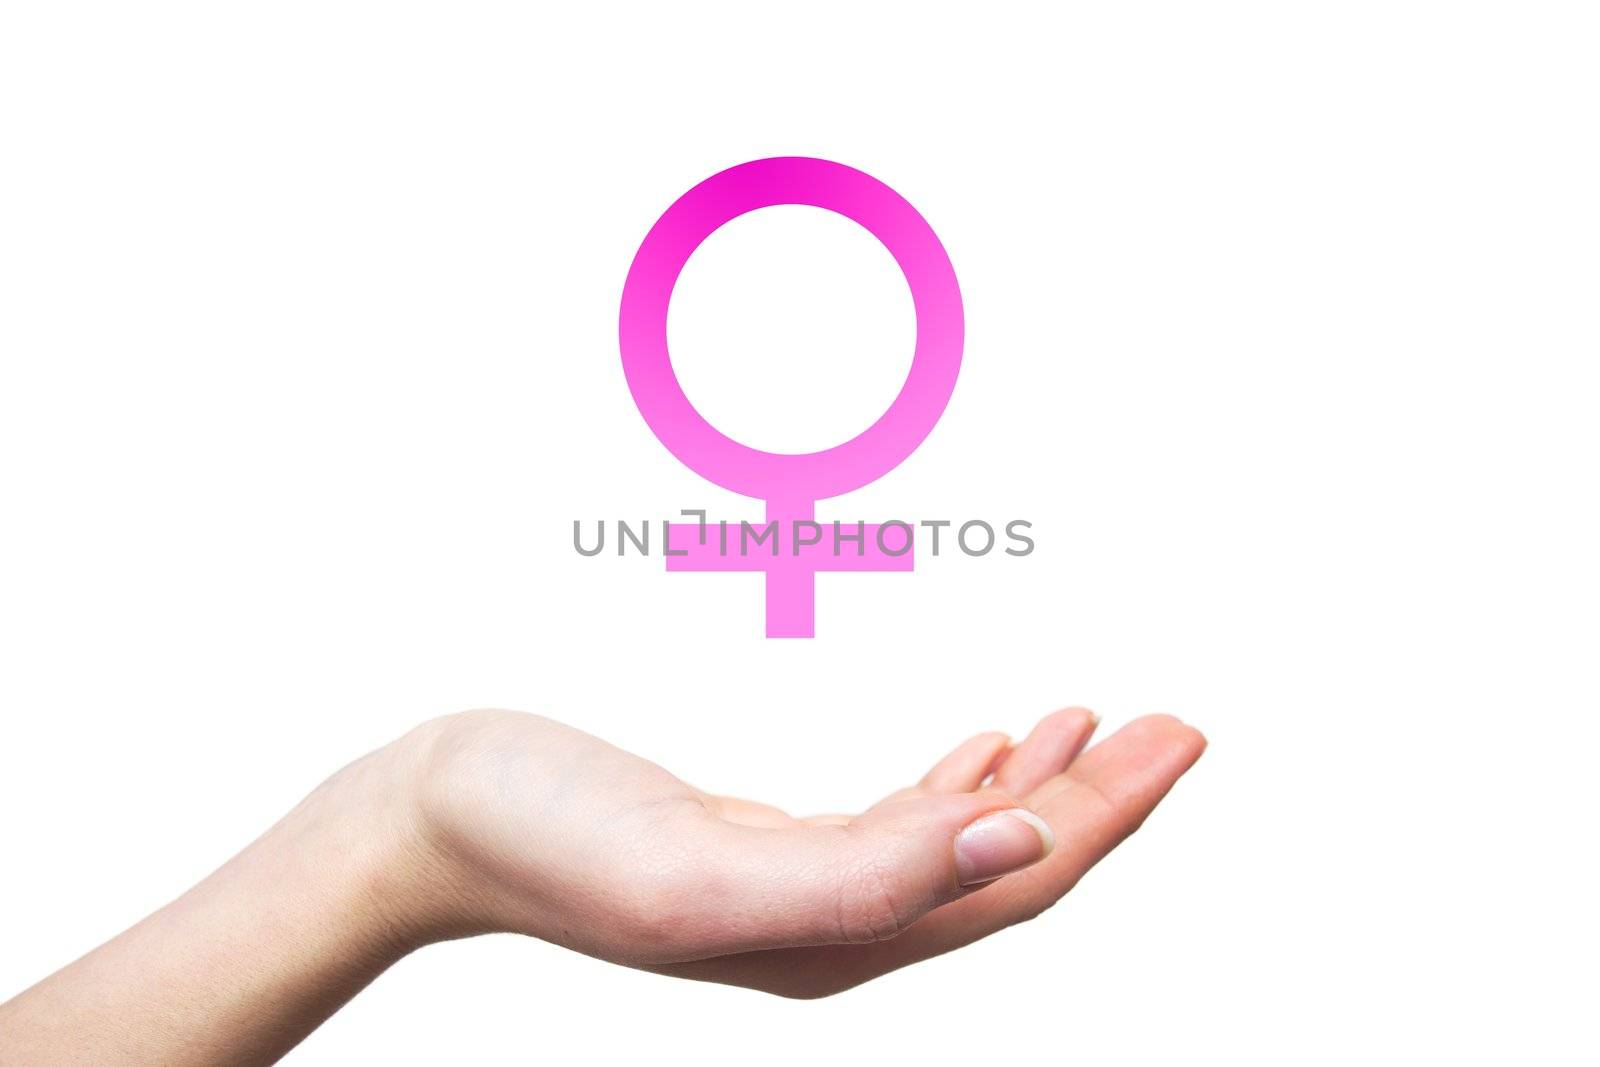 female sex sign, woman's hand on white background by simpson33